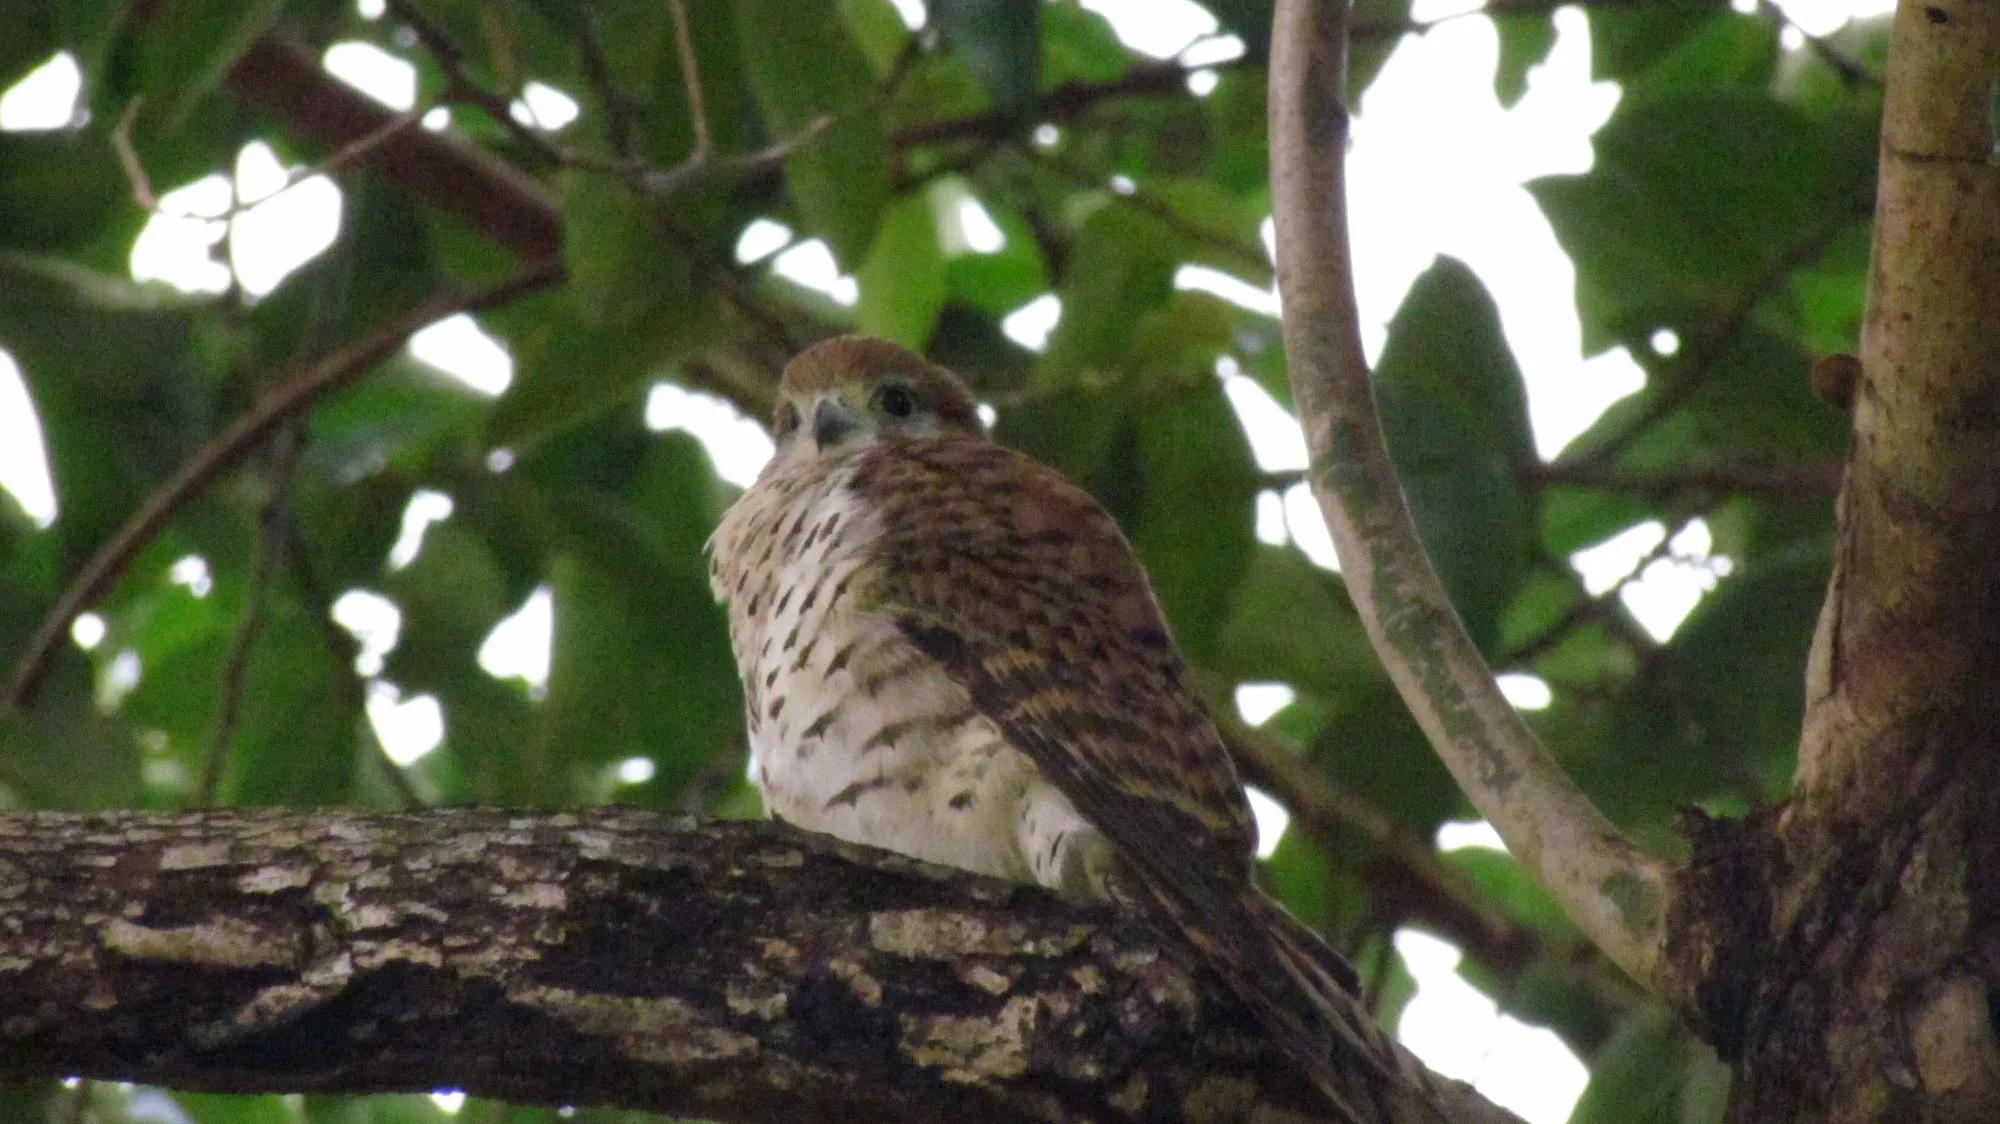 The Mauritius kestrel is rufous in color and it is also barred all over its body.